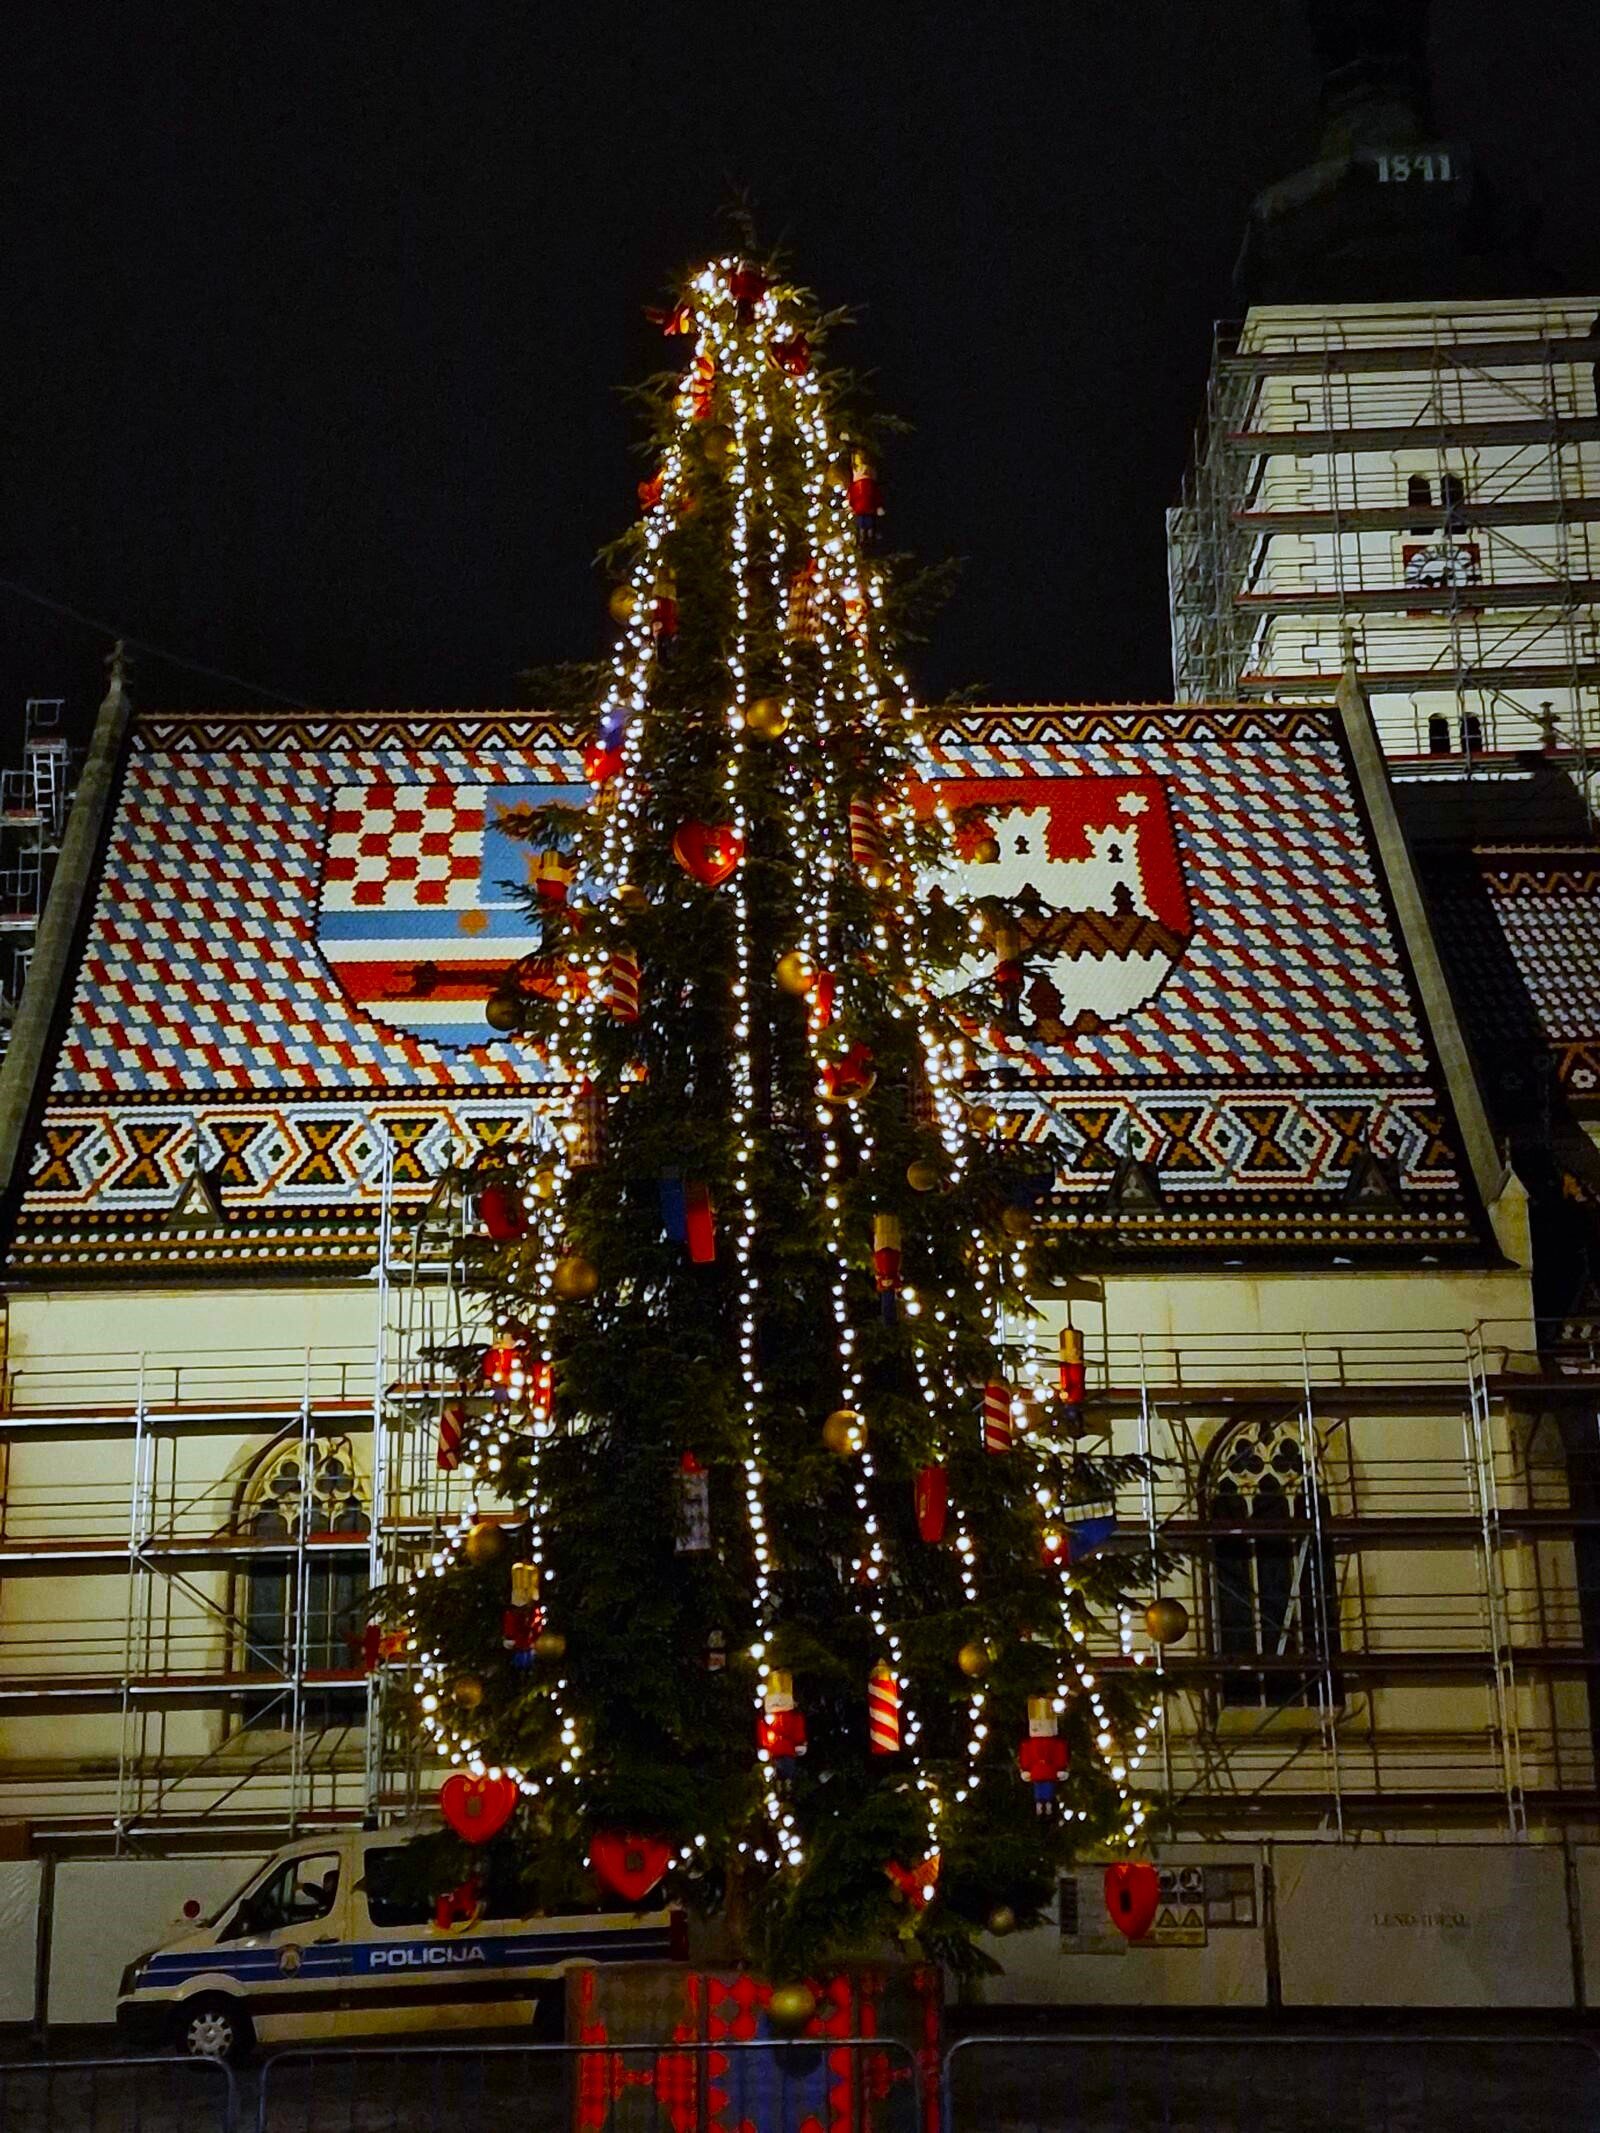 A large decorated christmas tree in the foreground with an old church behind it with a colourful patterned roof showing two coats of arms, the colours are blue, white and red